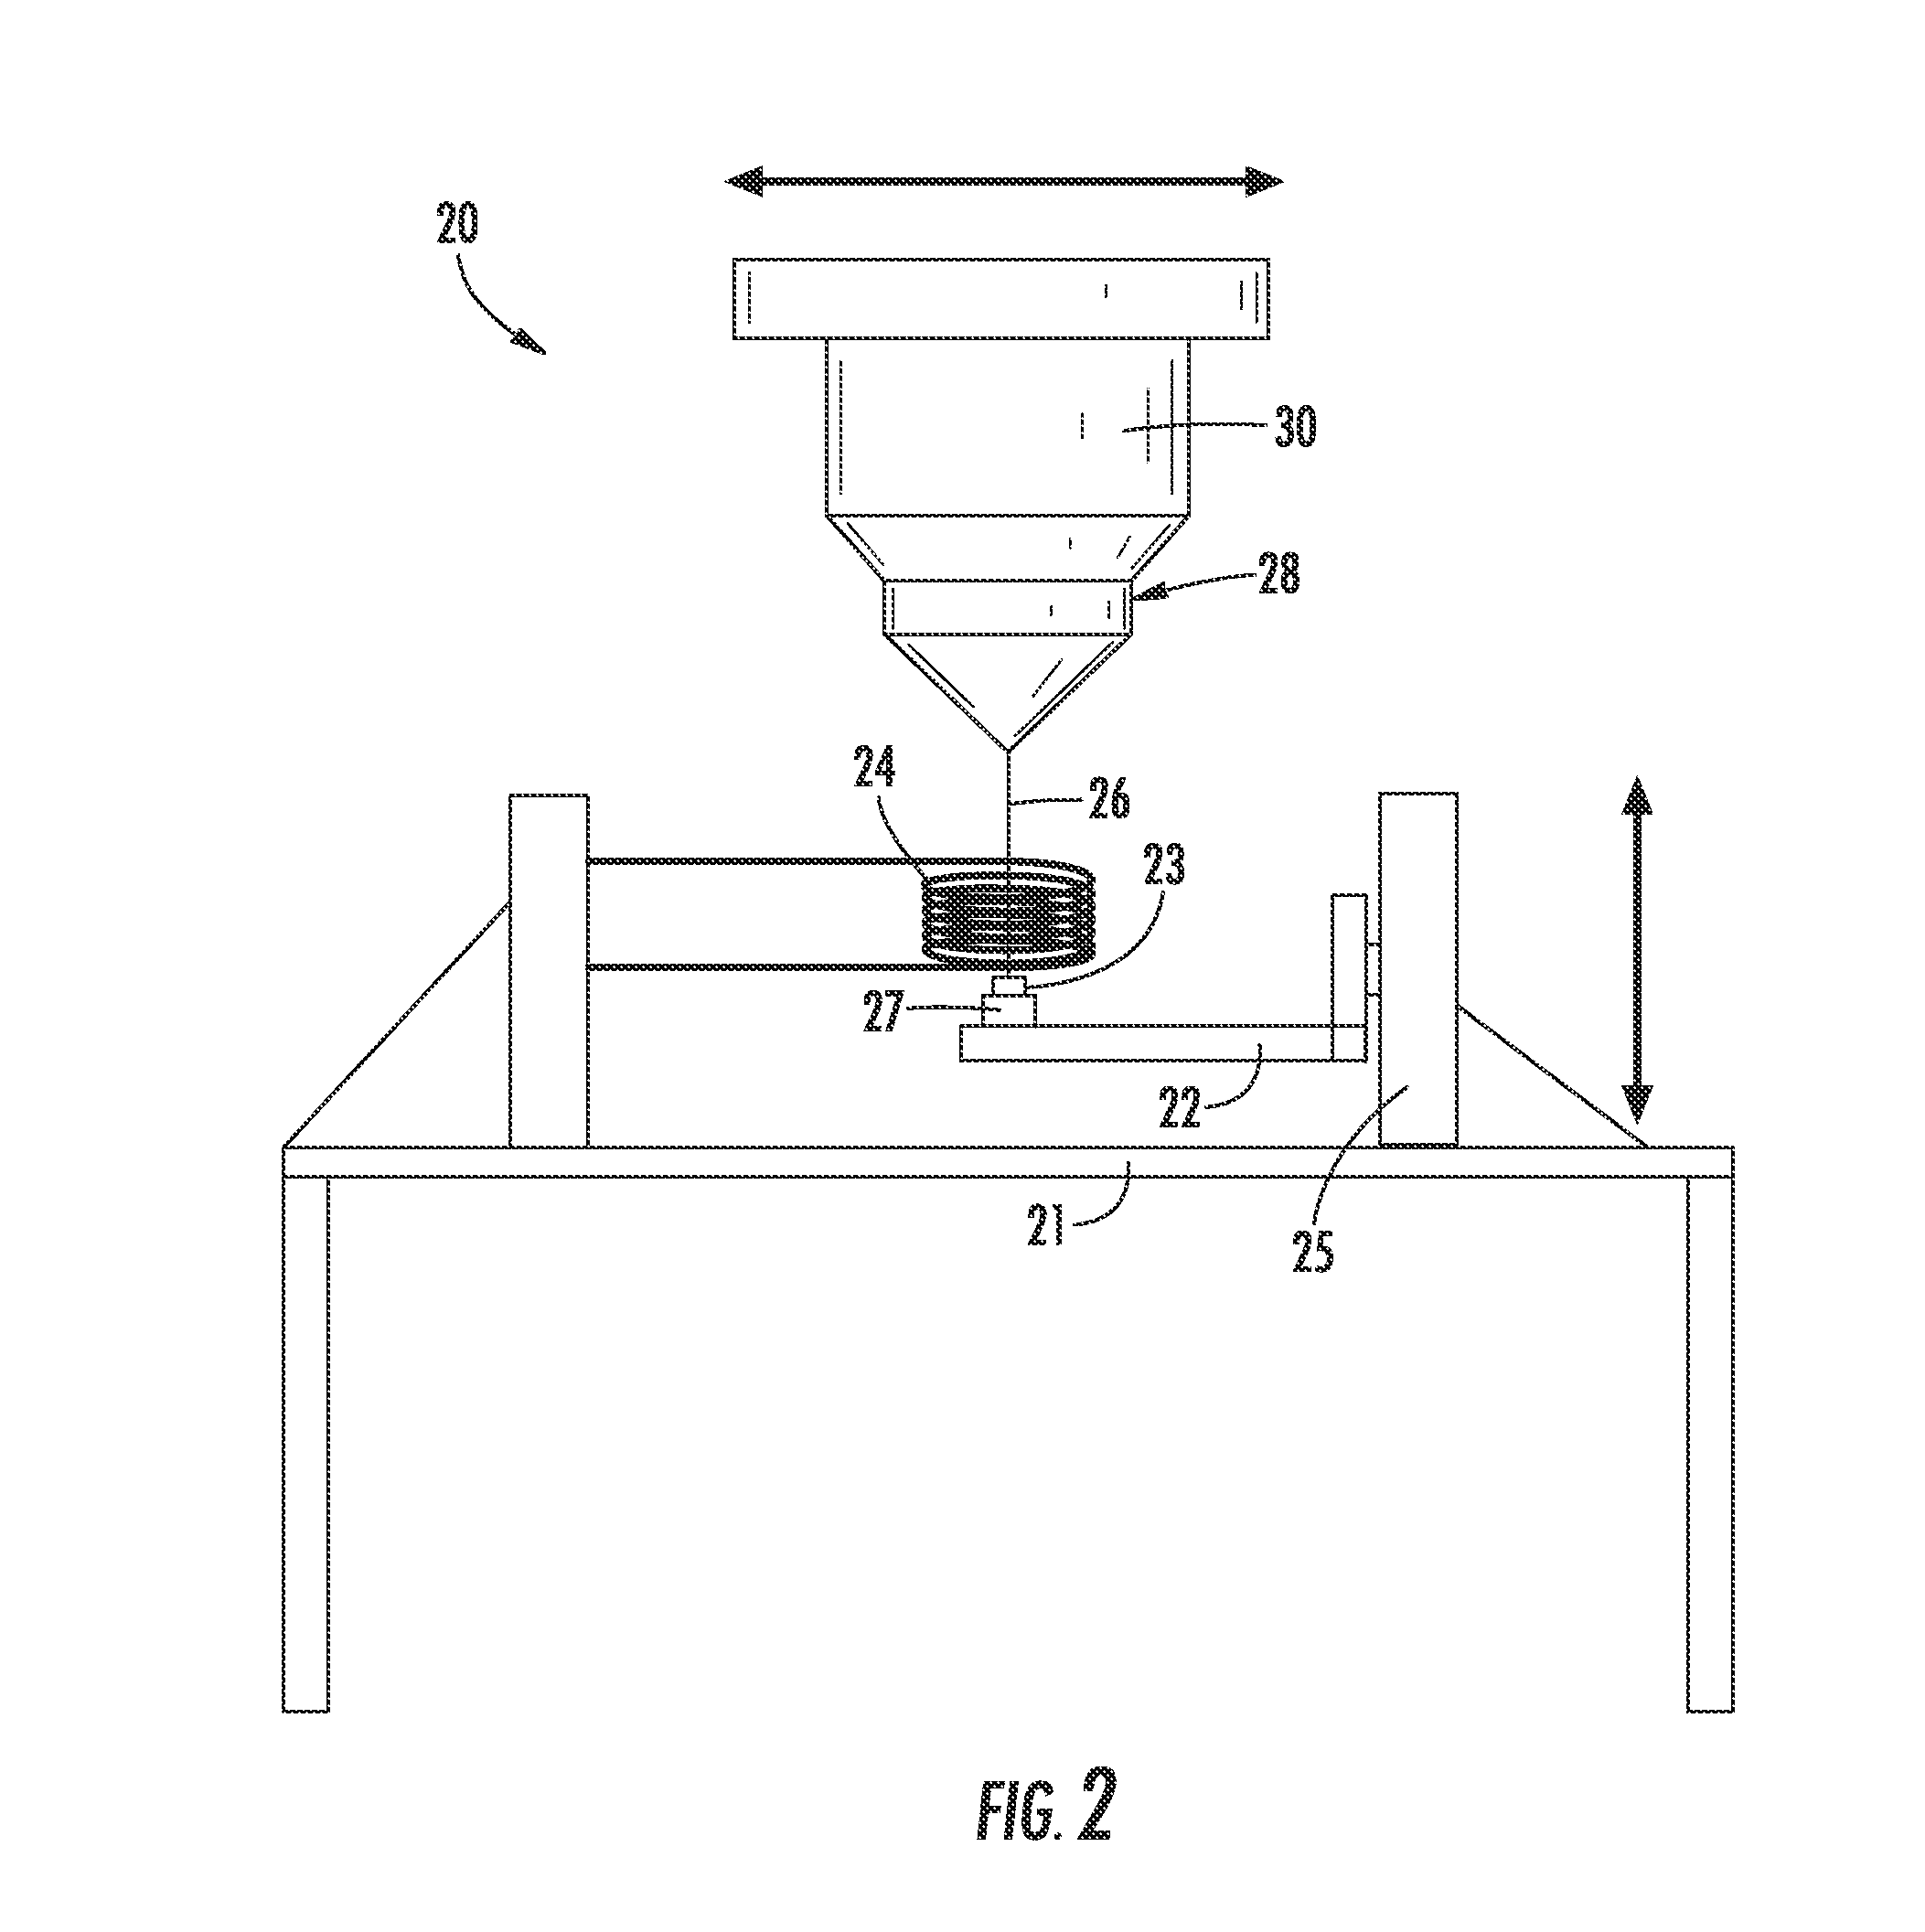 Apparatus and method for direct writing of single crystal super alloys and metals